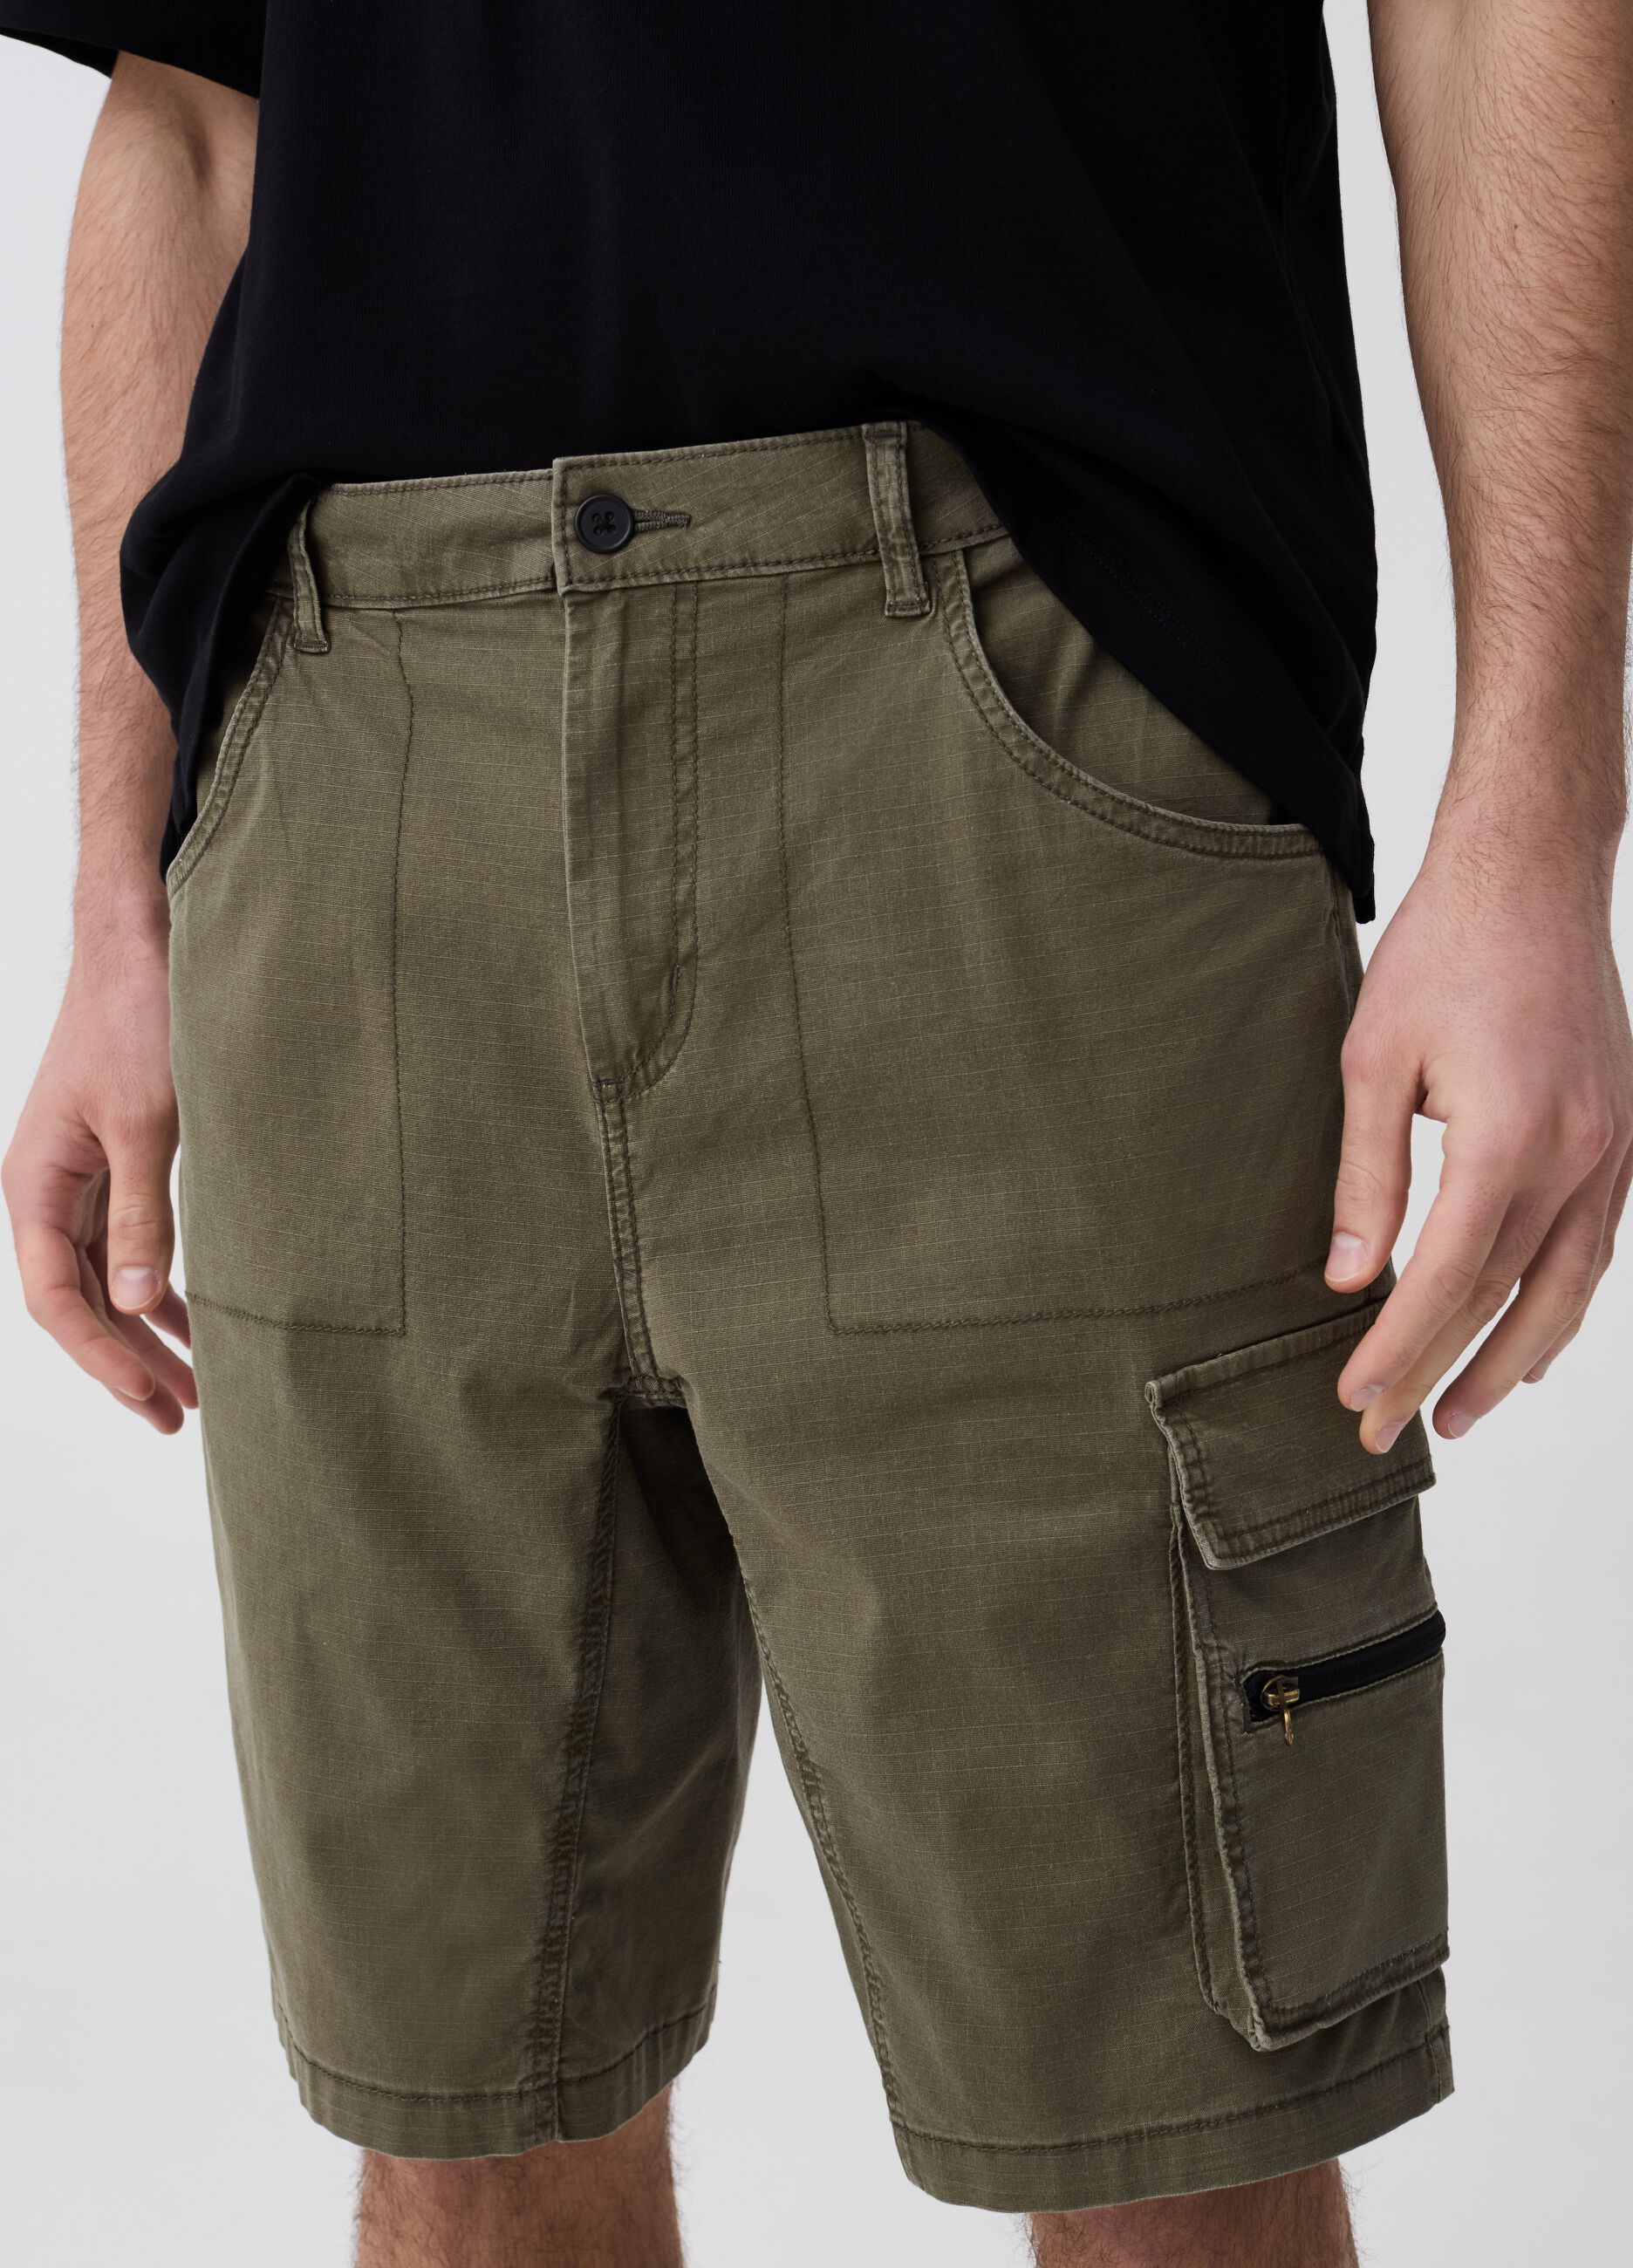 Cargo Bermuda shorts with ripstop weave